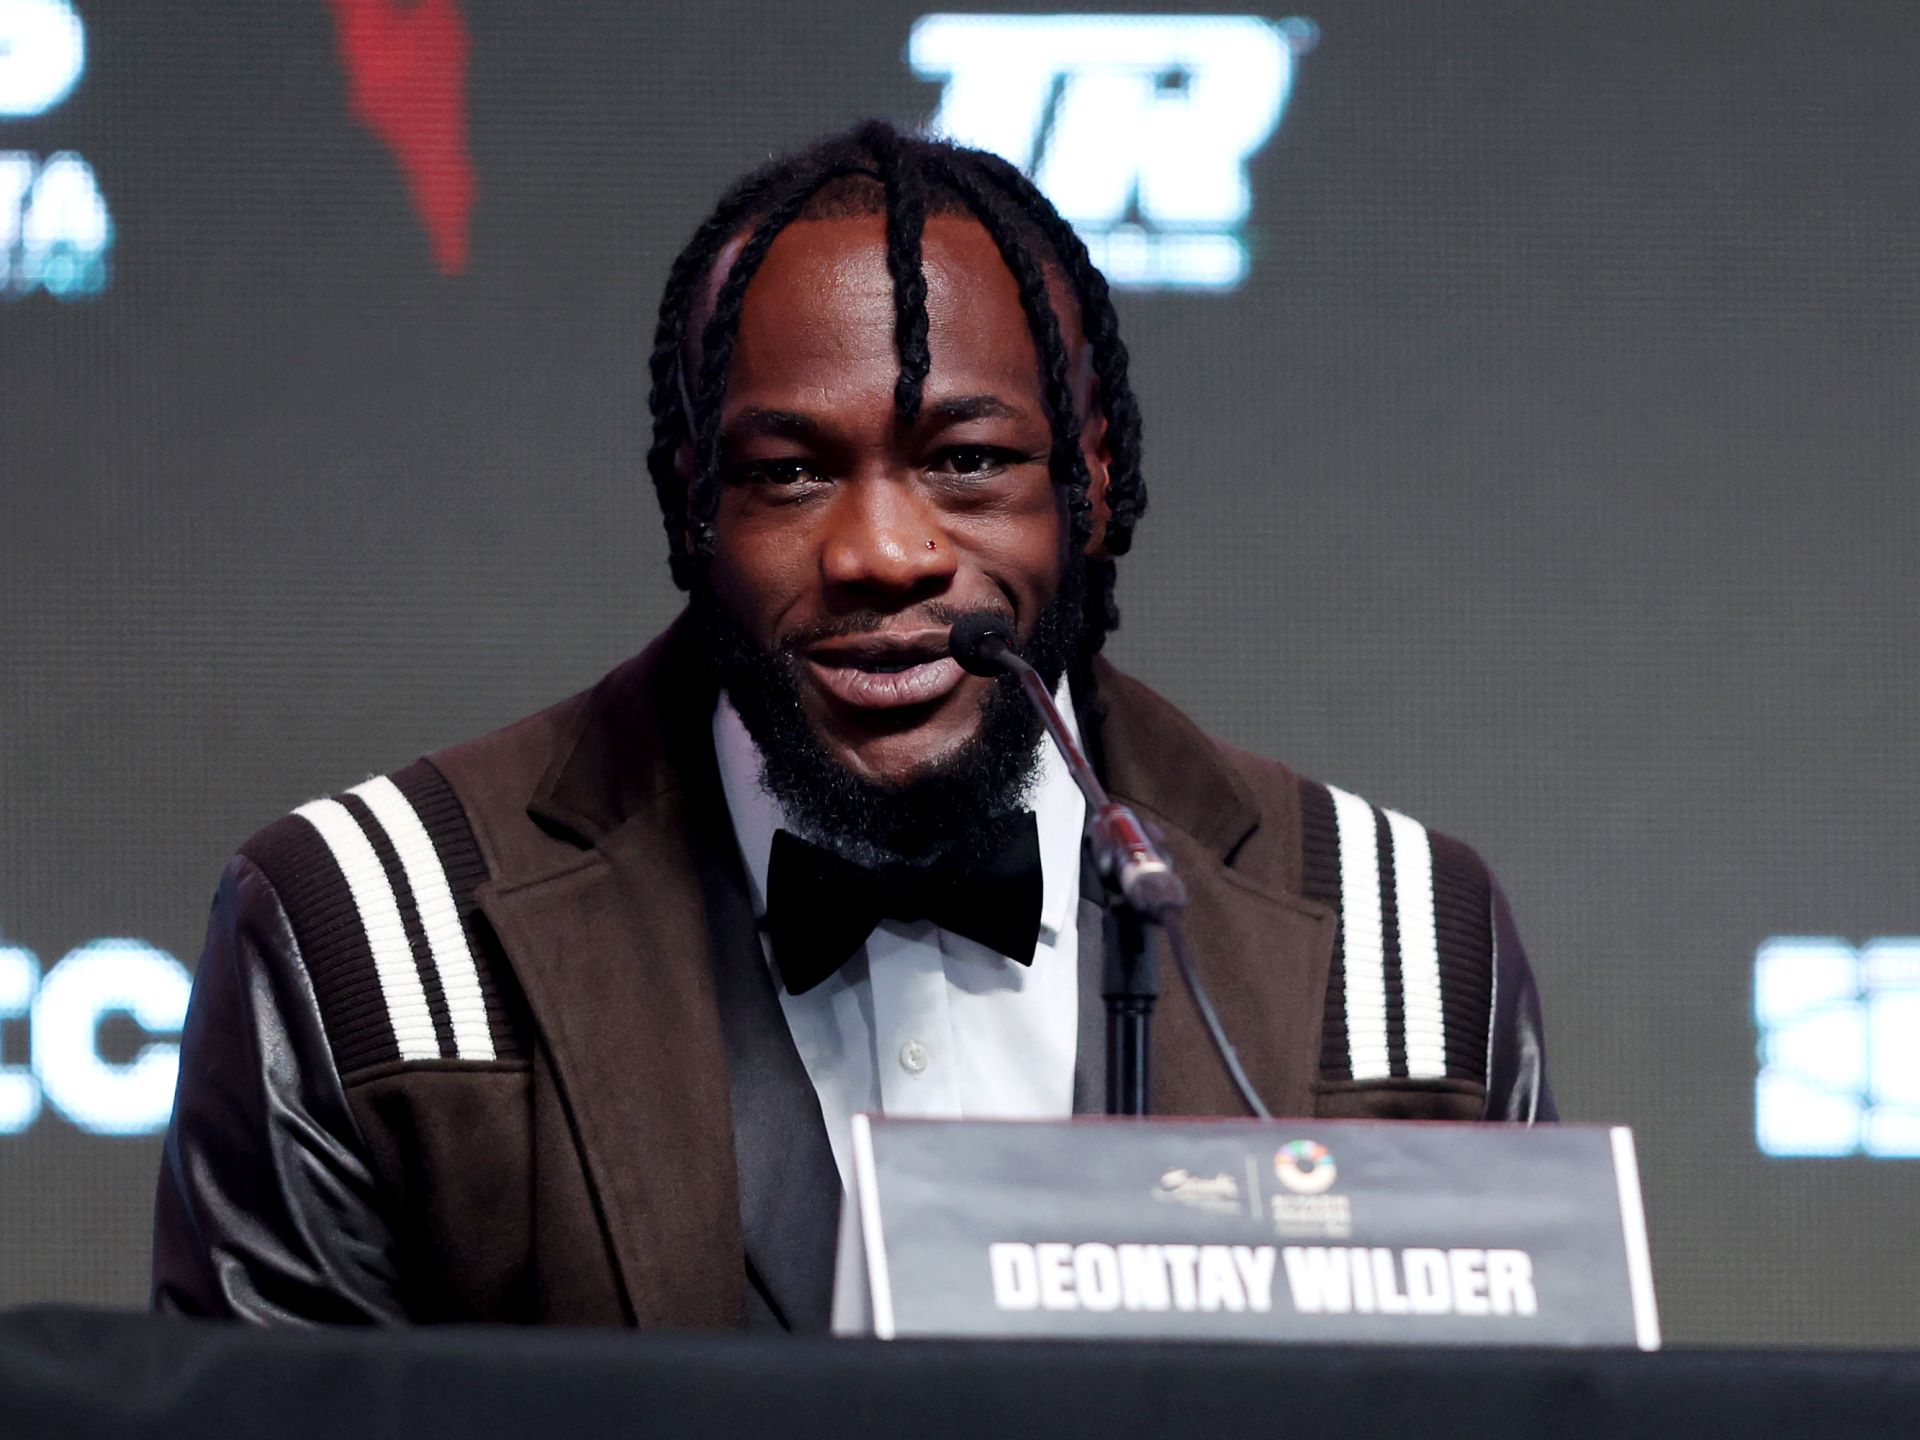 Deontay Wilder Vows To Knock Out Joseph Parker Early In Upcoming Fight